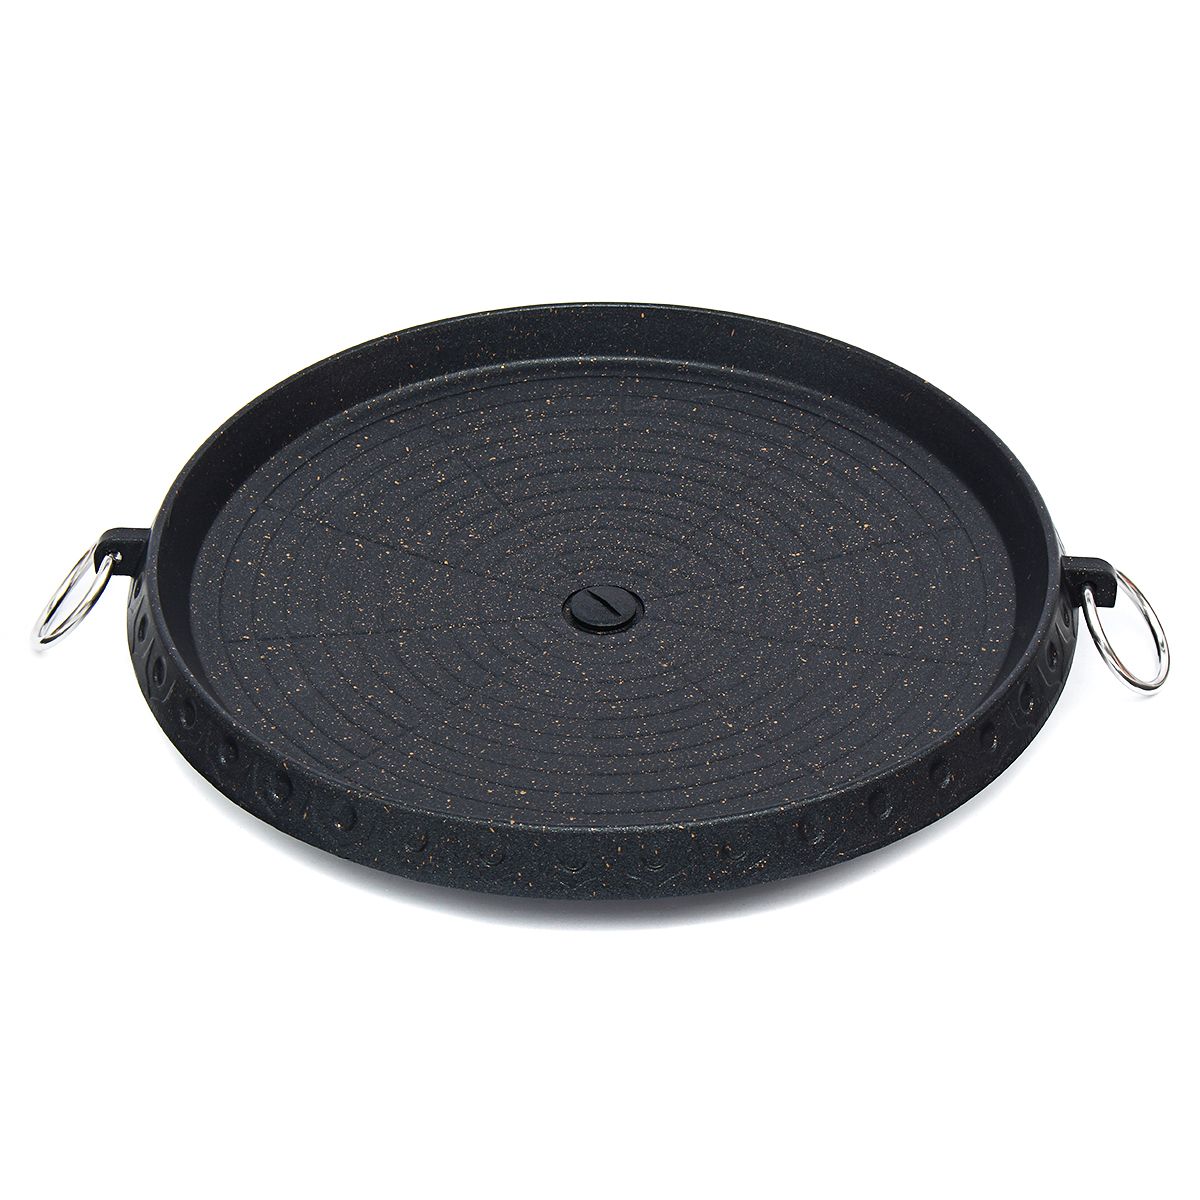 12-Inch-Korean-Barbecue-Nonstick-Plate-Grill-Pan-Maifan-Stone-Round-Cooker-BBQ-Tray-1520143